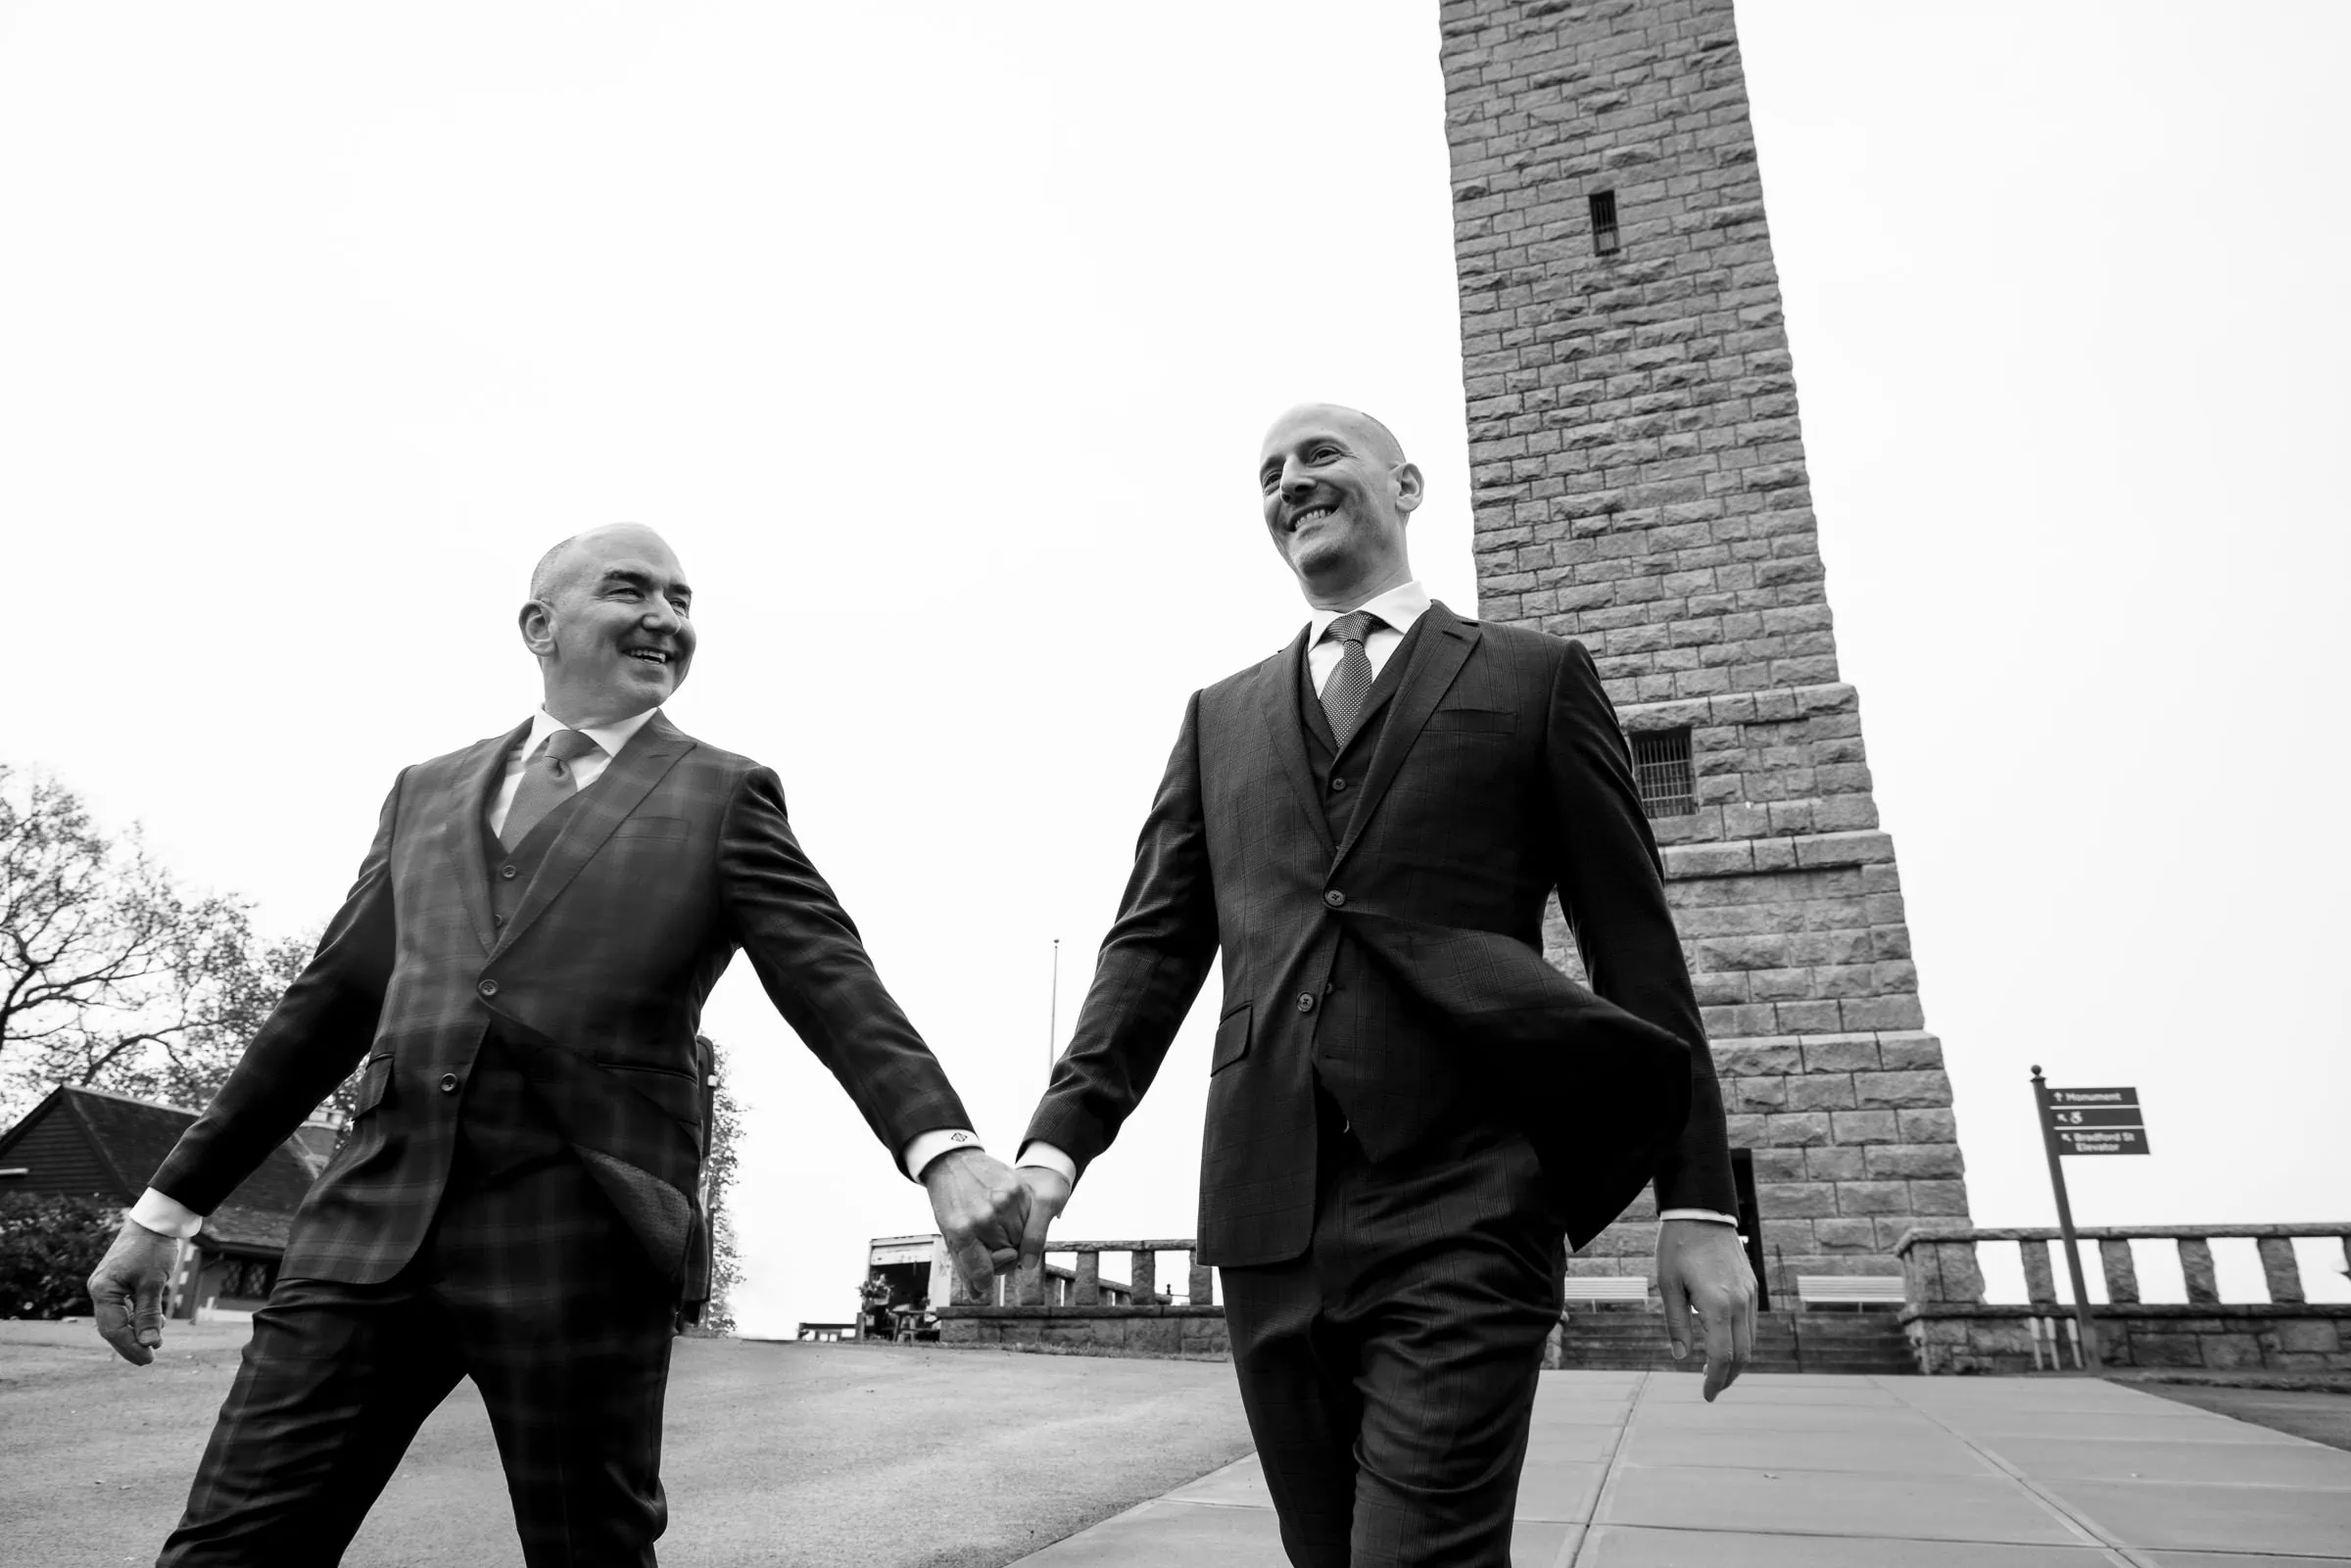 Two men in suits walk hand in hand by the pilgrims monument in provincetown